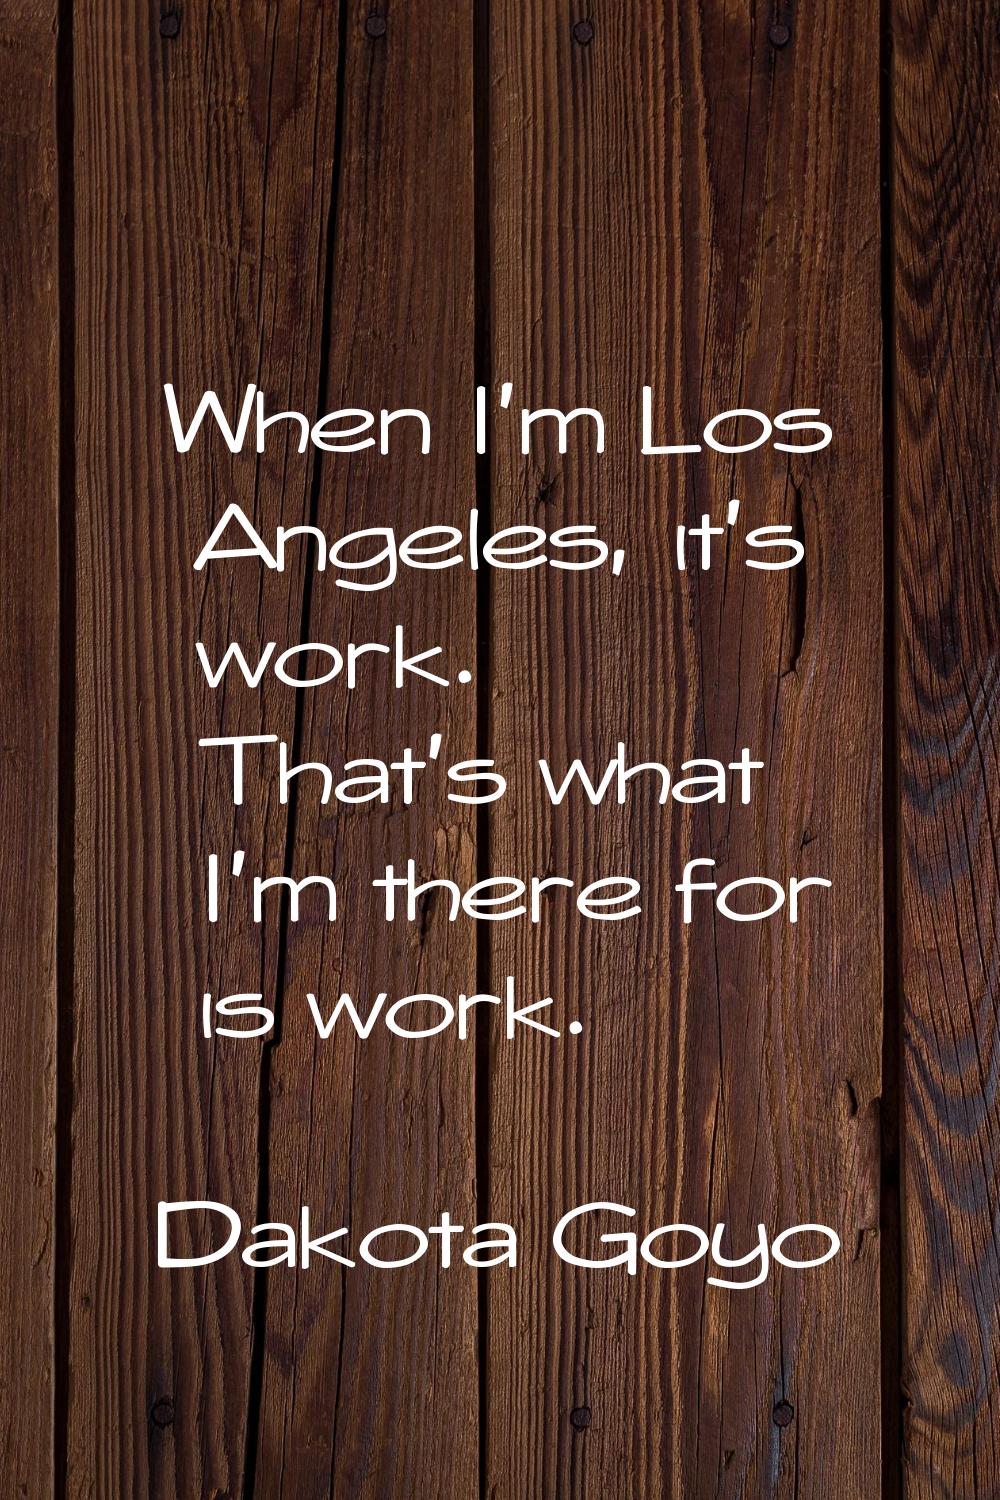 When I'm Los Angeles, it's work. That's what I'm there for is work.